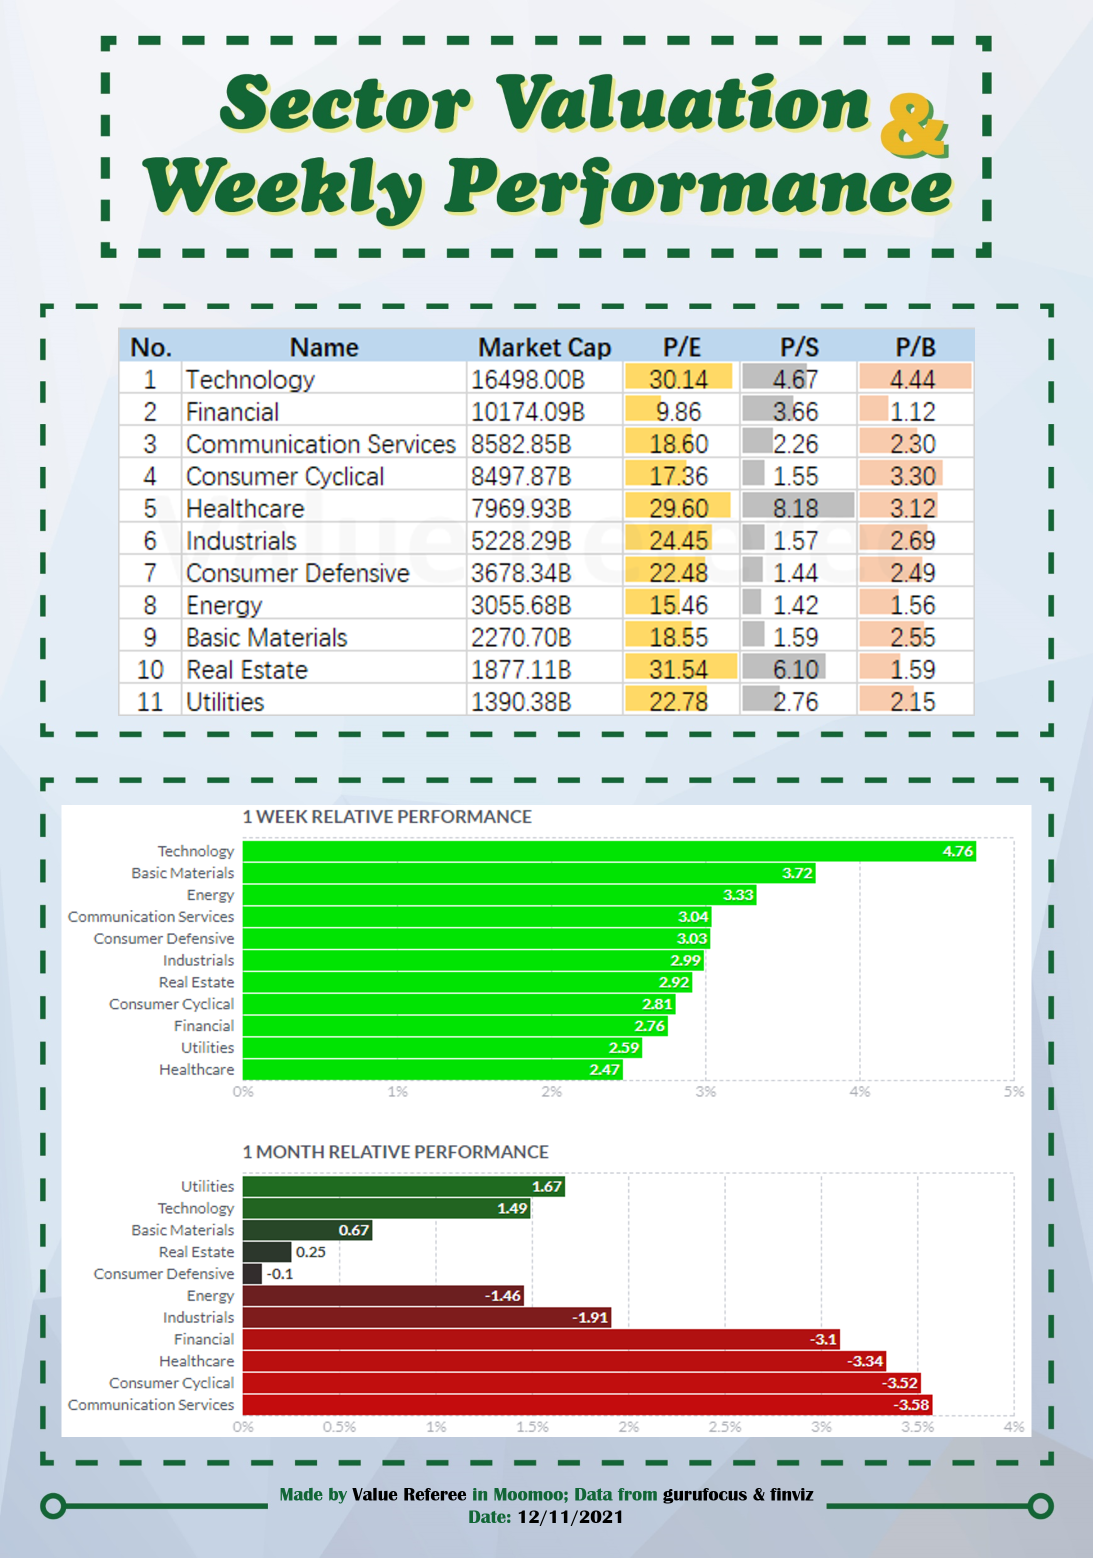 Sector Valuation & Weekly Performance (12/10)